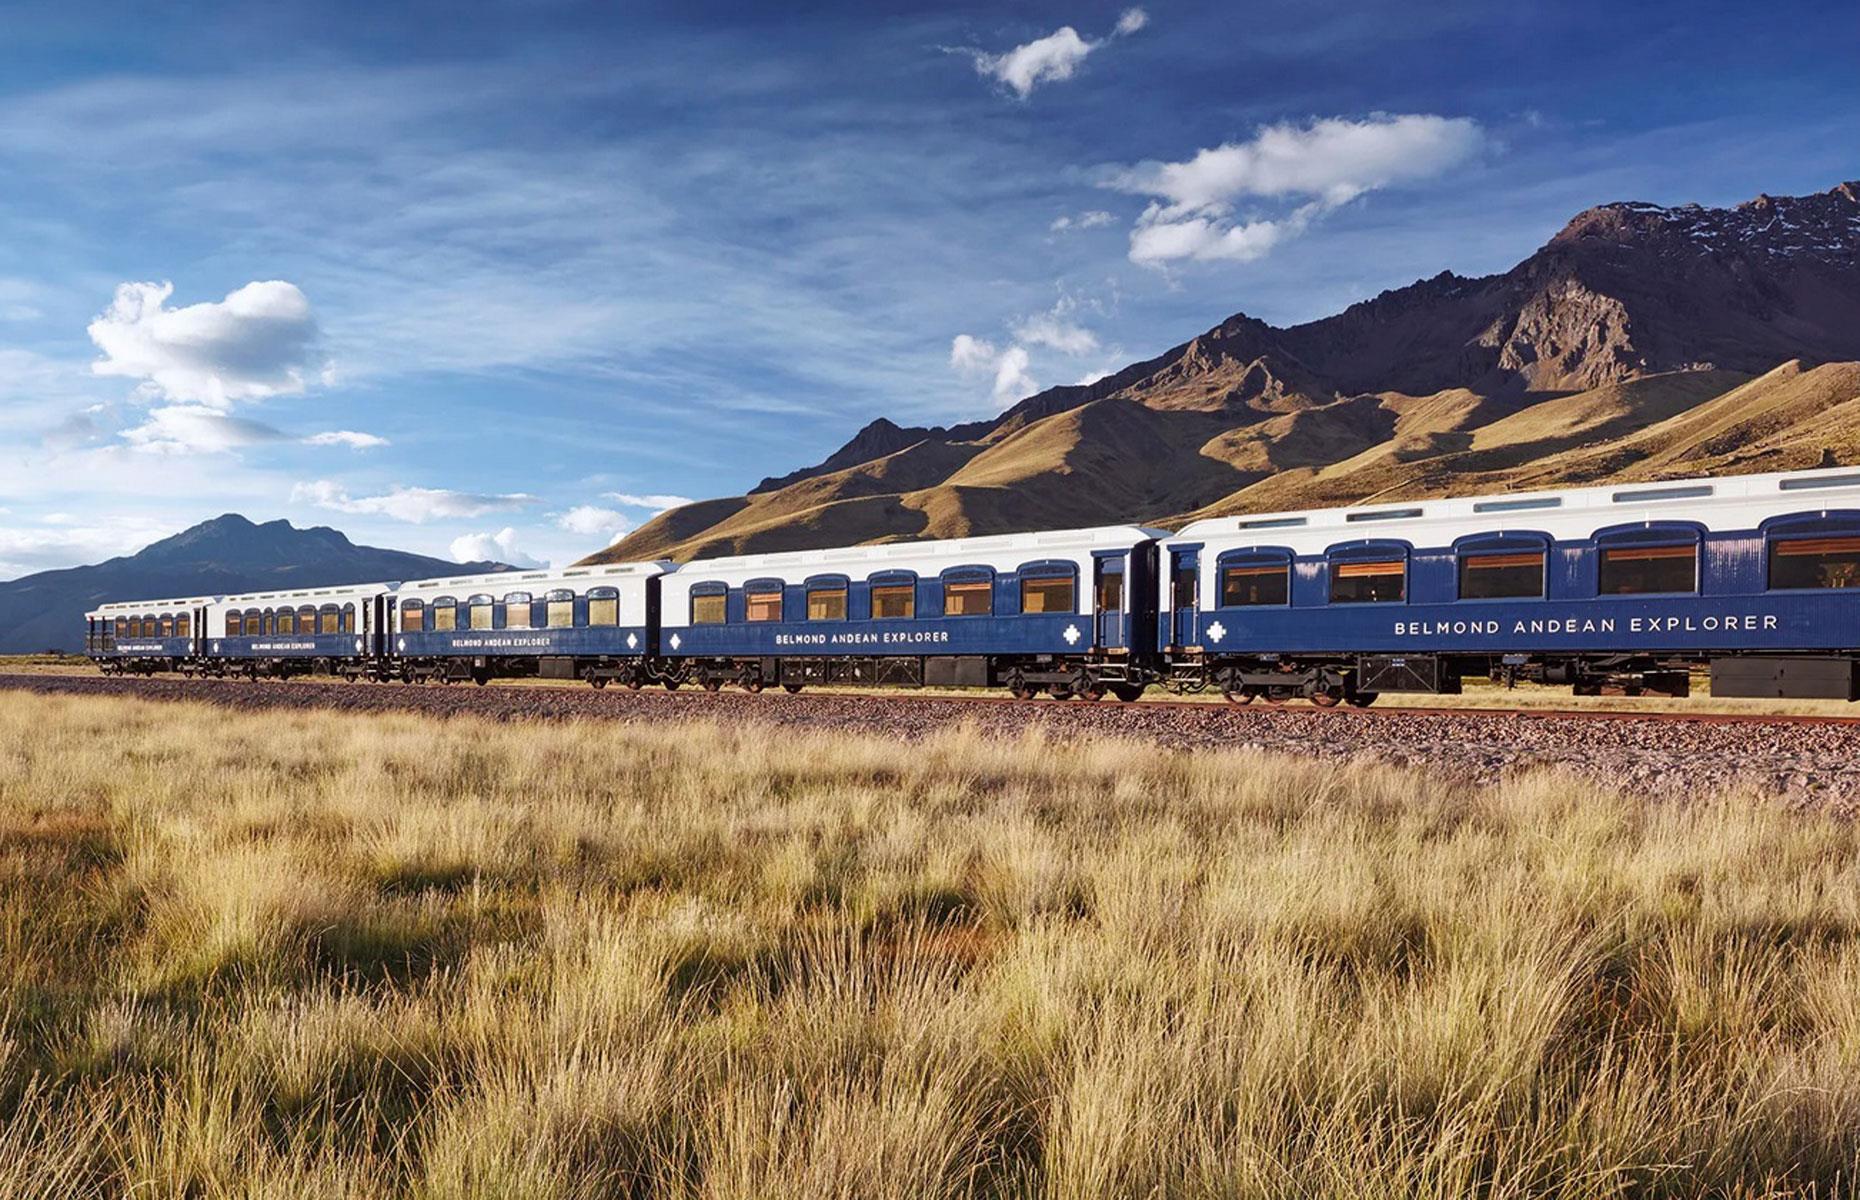 <p>South America's most elegant train, Belmond's <em>Andean Explorer</em> connects the ancient Peruvian cities of Cusco and Arequipa, offering astonishing vistas of the Andes Mountains.</p>  <p>Decorated with furnishings that marry traditional Peruvian style with Art Deco elements, the 16-carriage midnight blue train is a real gem.</p>  <p>Guests are taken on culinary adventures exploring local cuisine in the train's two dining cars. They can also relax with a cocktail in the lounge car or boost their well-being in the spa carriage.</p>